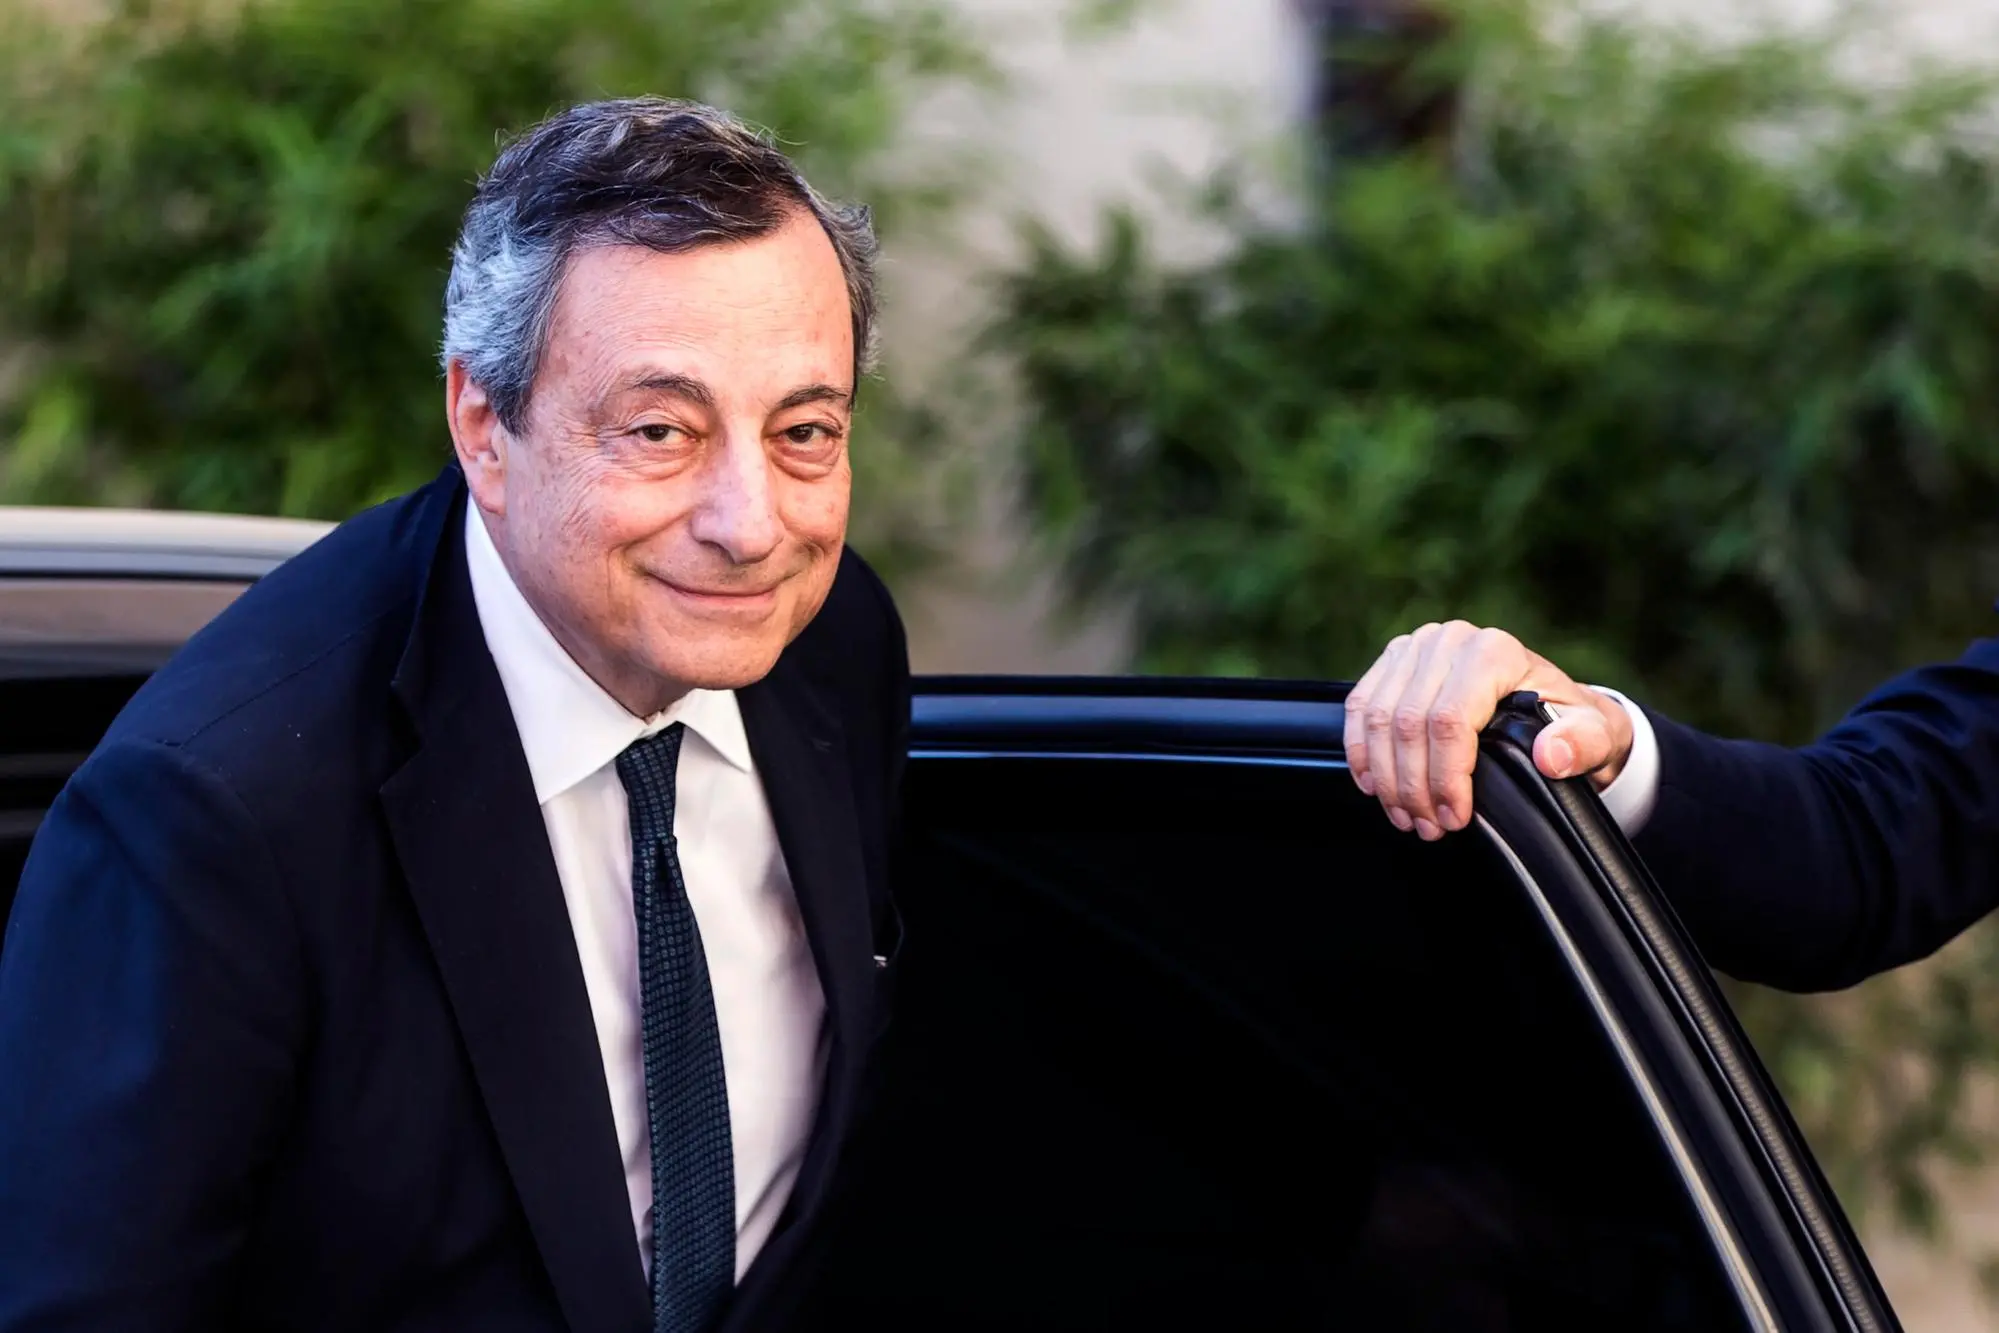 Italian Prime Minister Mario Draghi arrives to pay his respects to Italian journalist Eugenio Scalfari as the coffin lies in state at the City Hall in Rome, Italy, 15 July 2022. Scalfari, who died on 14 July at the age of 98, founded two of Italy's most important news publications, daily newspaper La Repubblica and investigative journalism weekly 'L'Espresso'. ANSA/ ANGELO CARCONI